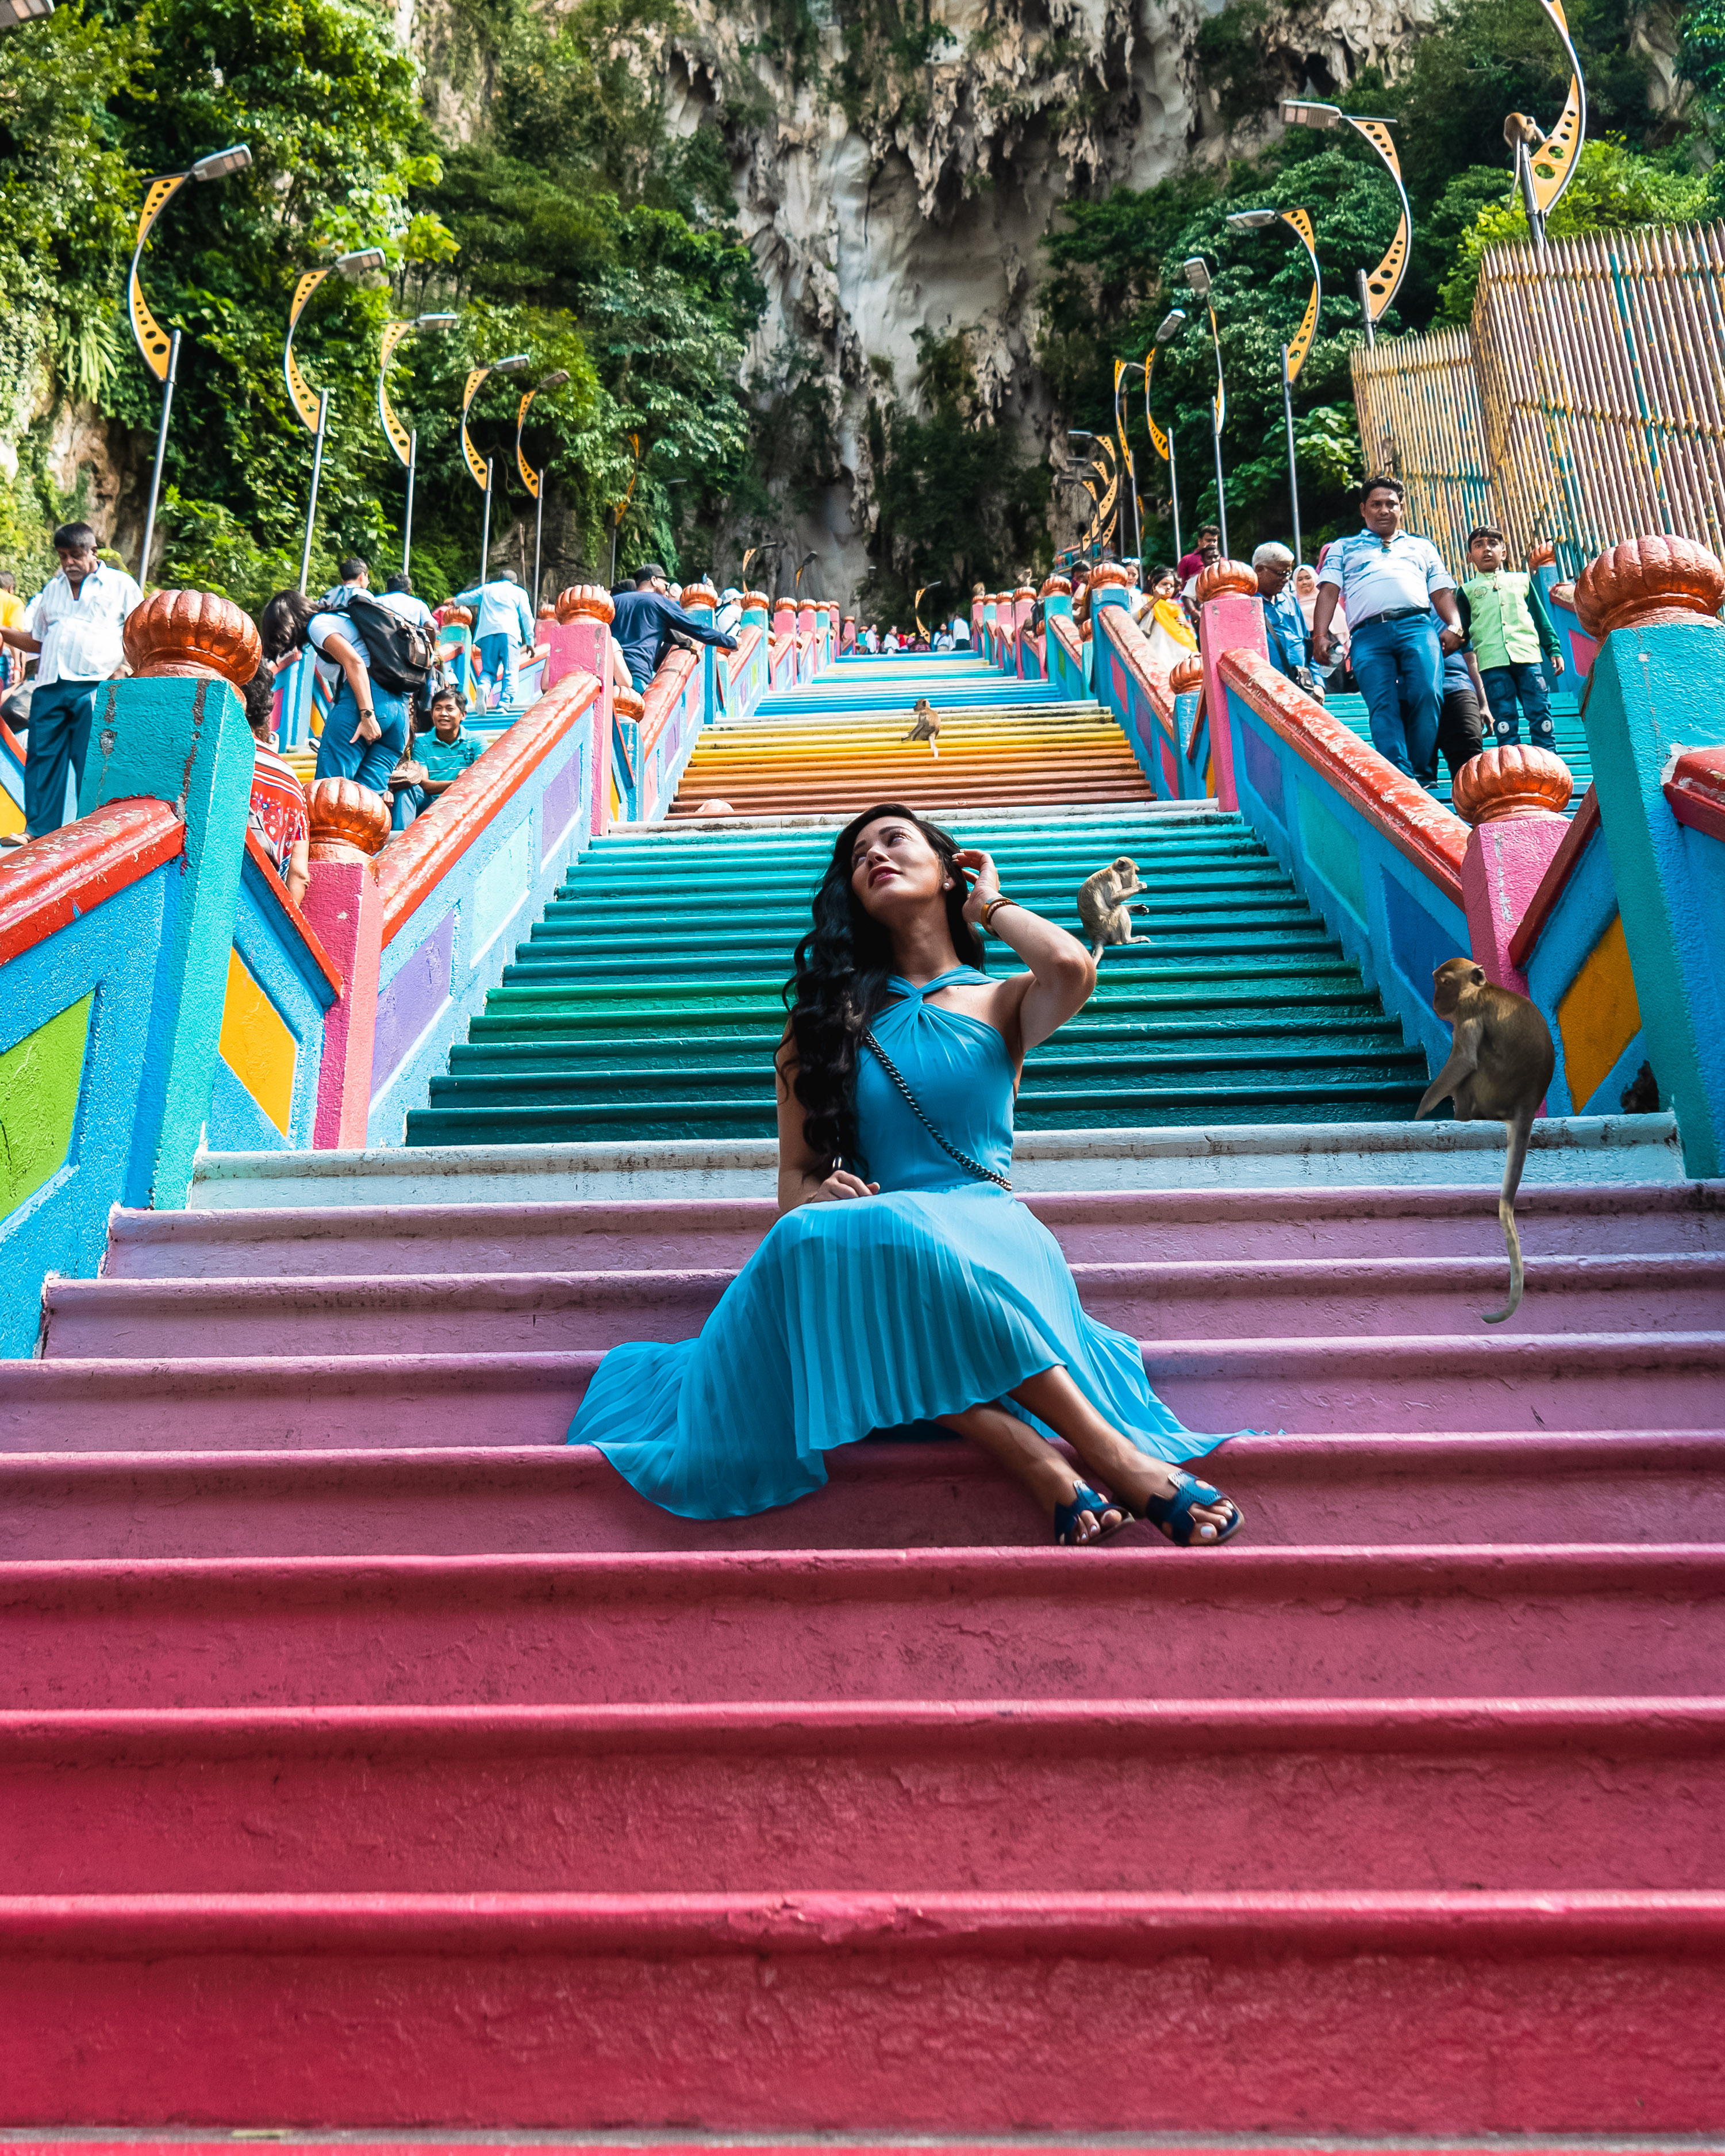 Isabella sitting on the steps at the Batu Caves in Kuala Lumpur